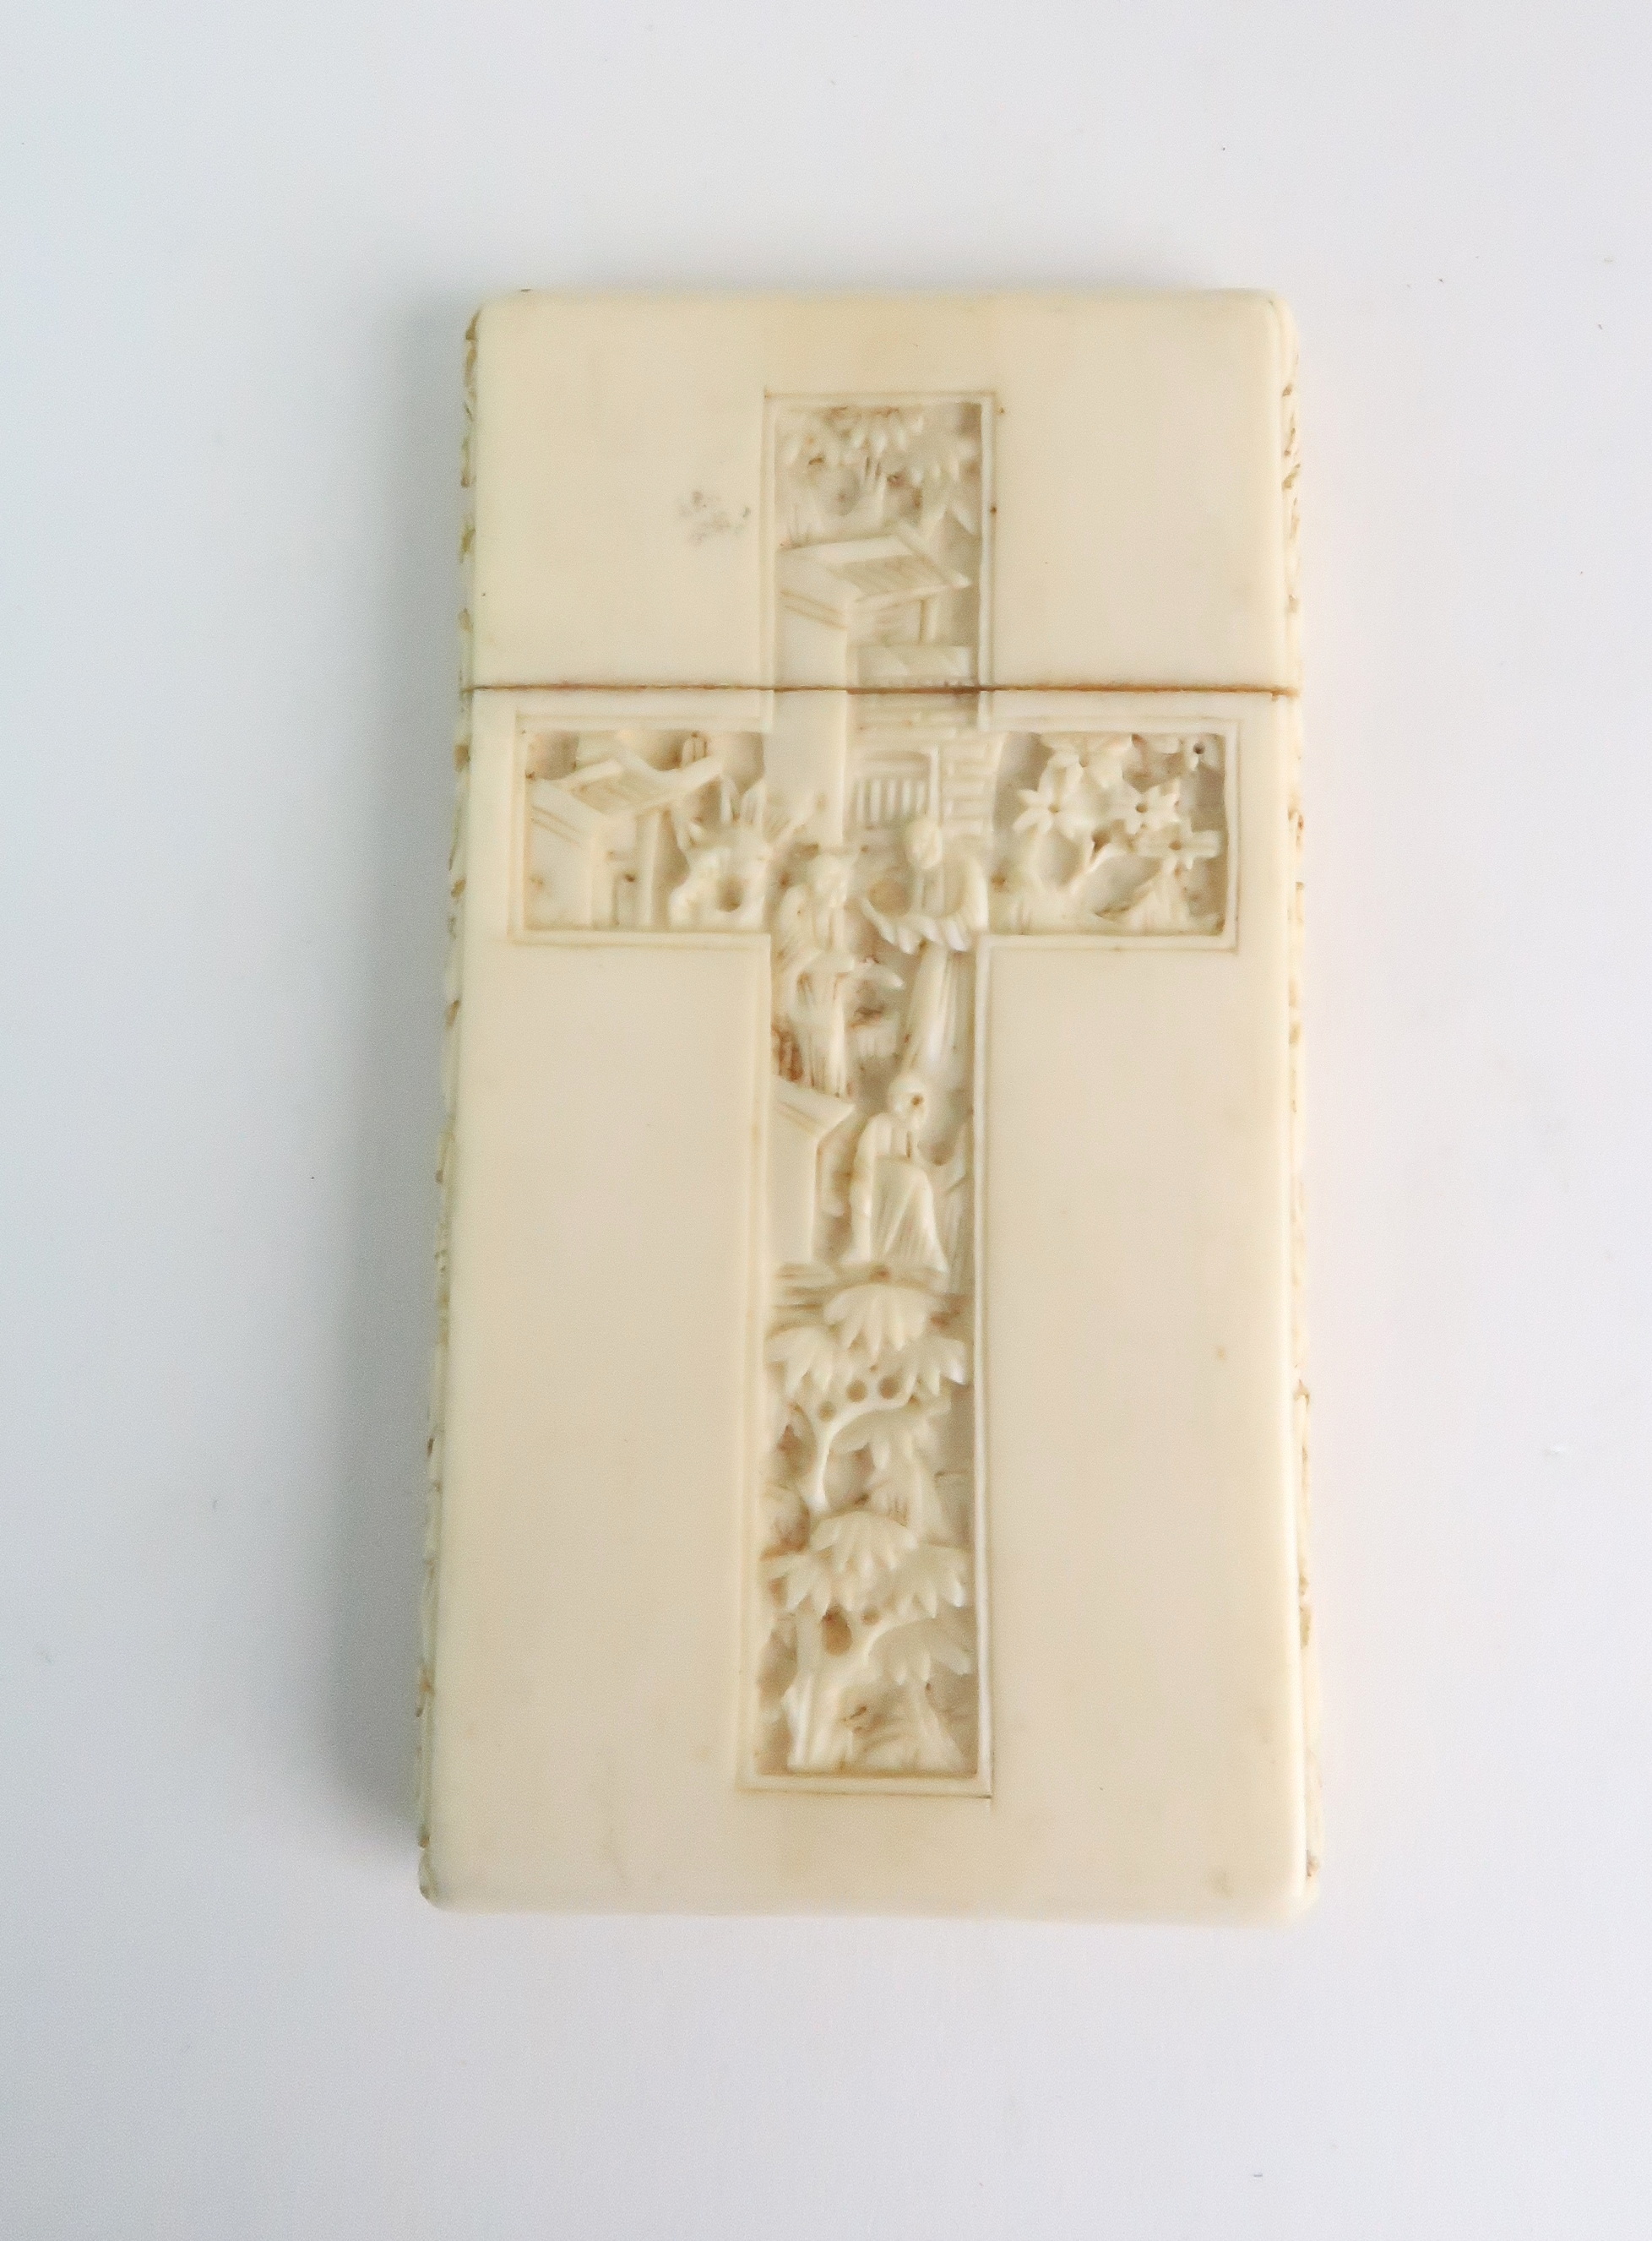 A CANTON IVORY CARD CASE carved with a vignette with figures in a village the reverse with a cross - Image 2 of 6